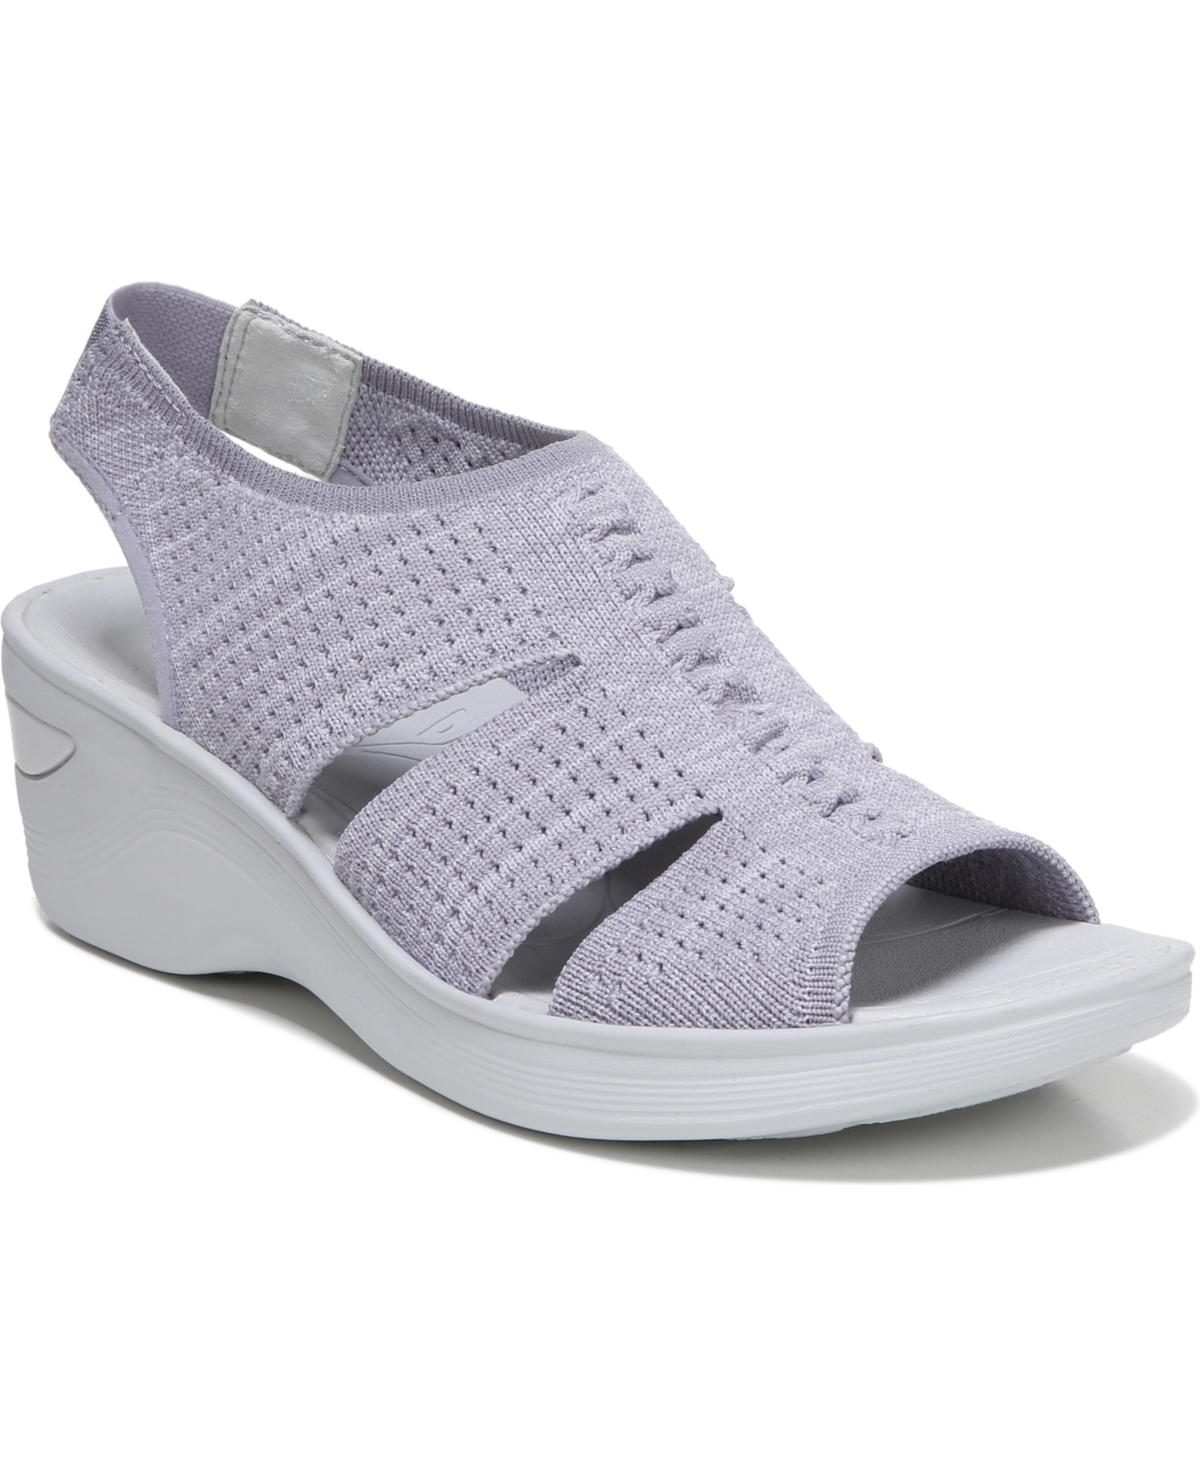 Bzees Double Up Wedge Slingback Sandal In Lavender Knit Fabric